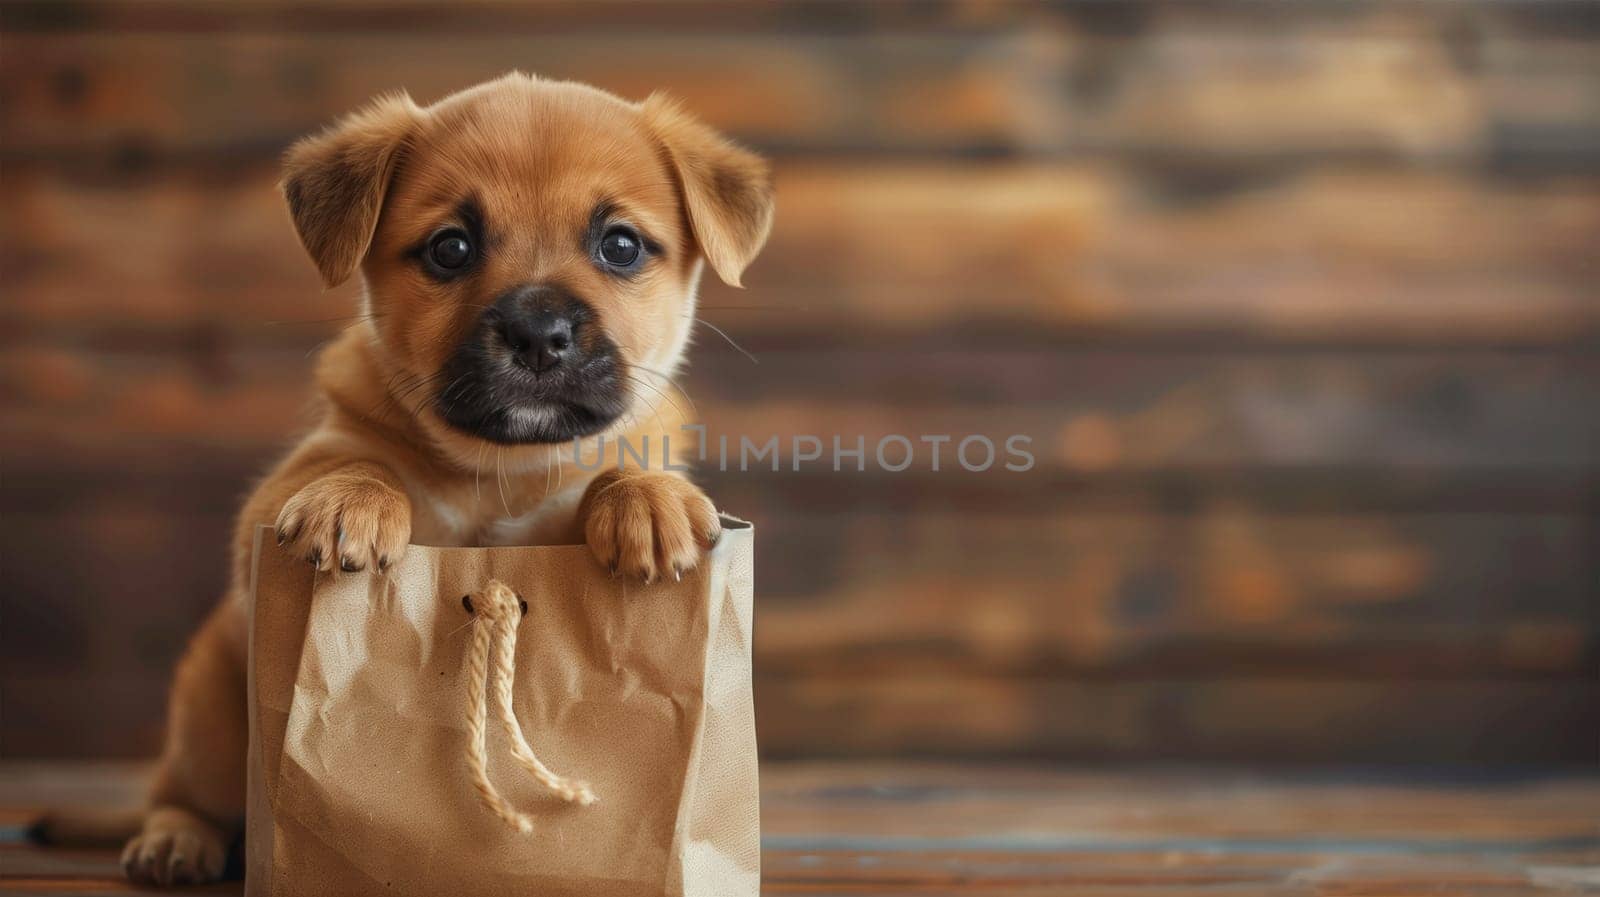 A cute puppy with expressive eyes sits inside a paper gift bag, ready to surprise someone for Fathers Day, against a wooden backdrop.